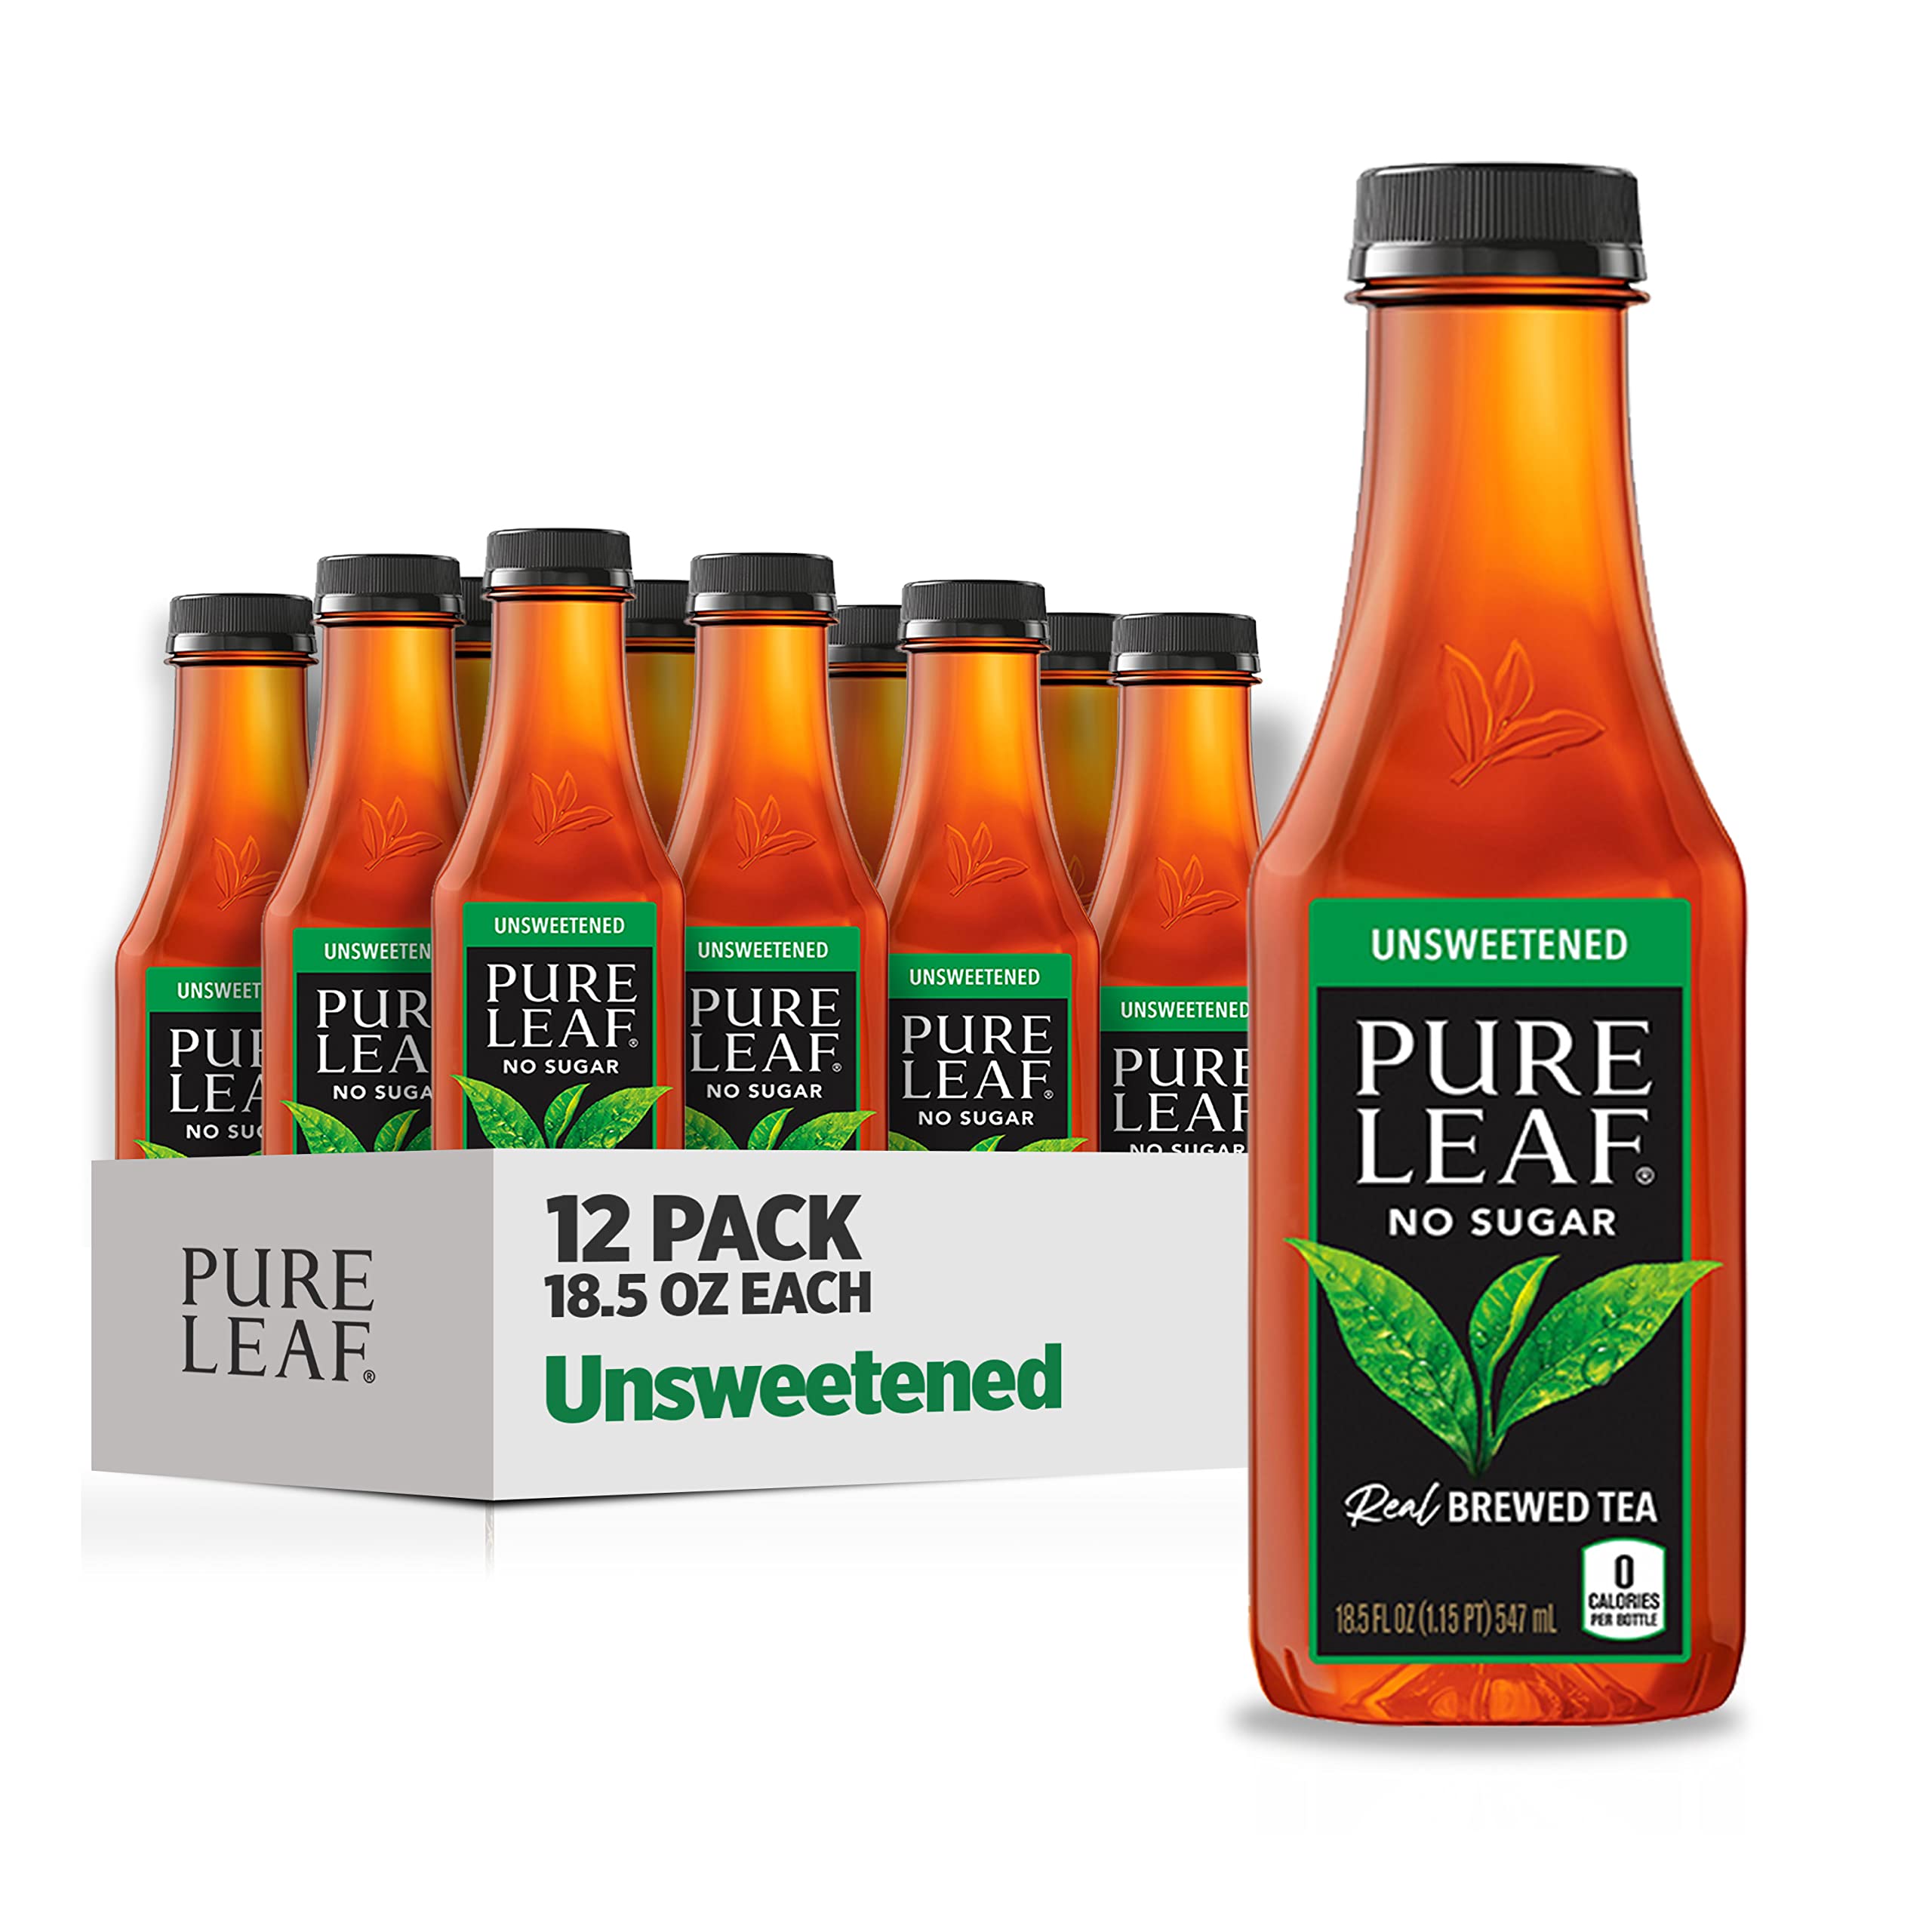 Save on Pure Leaf Real Brewed Green Tea - 6 pk Order Online Delivery